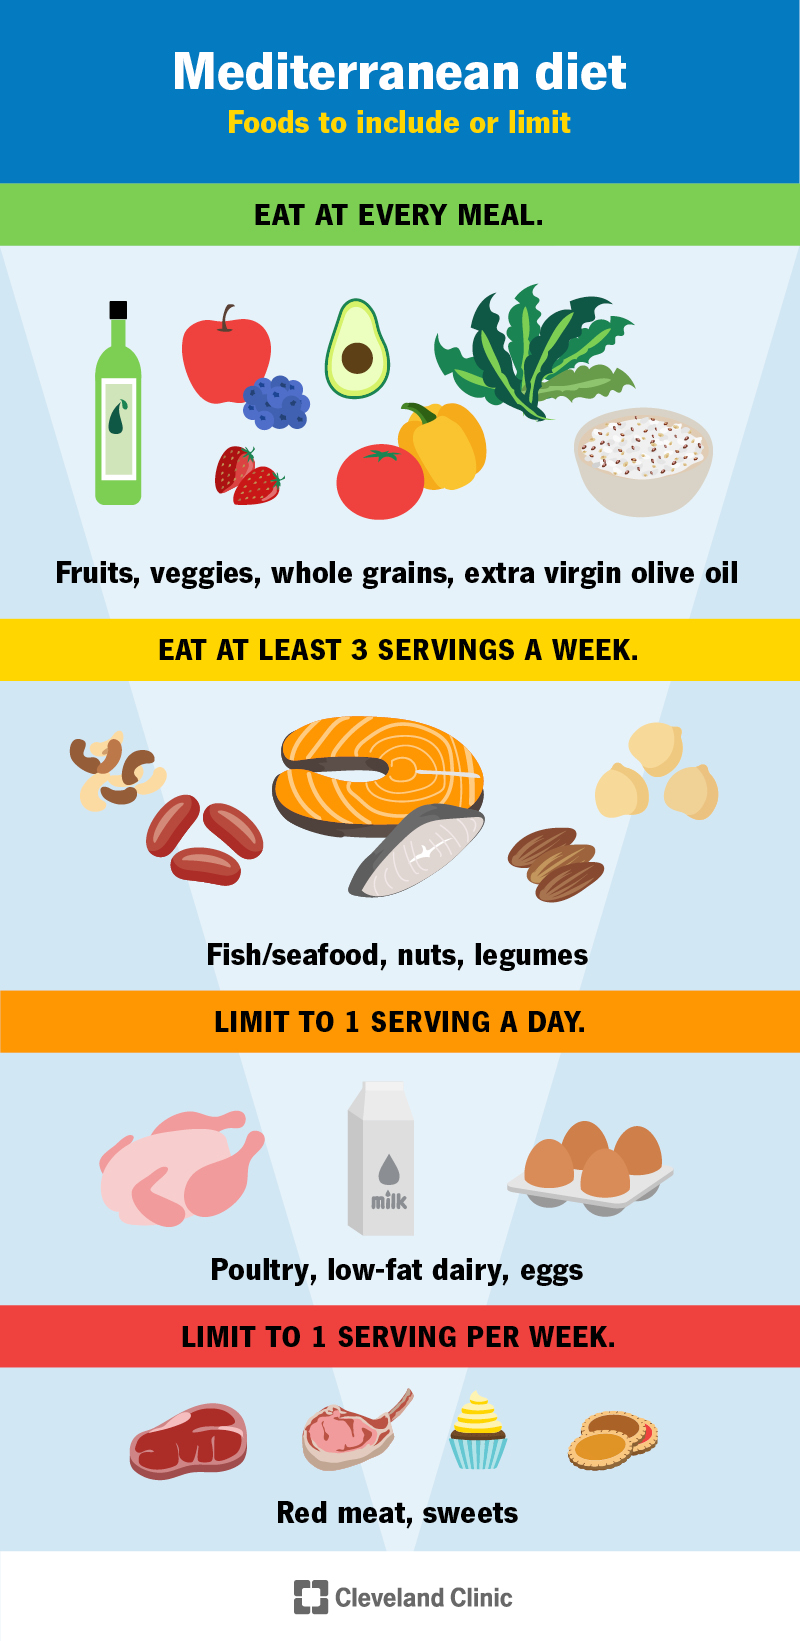 These are key features of the Mediterranean Diet